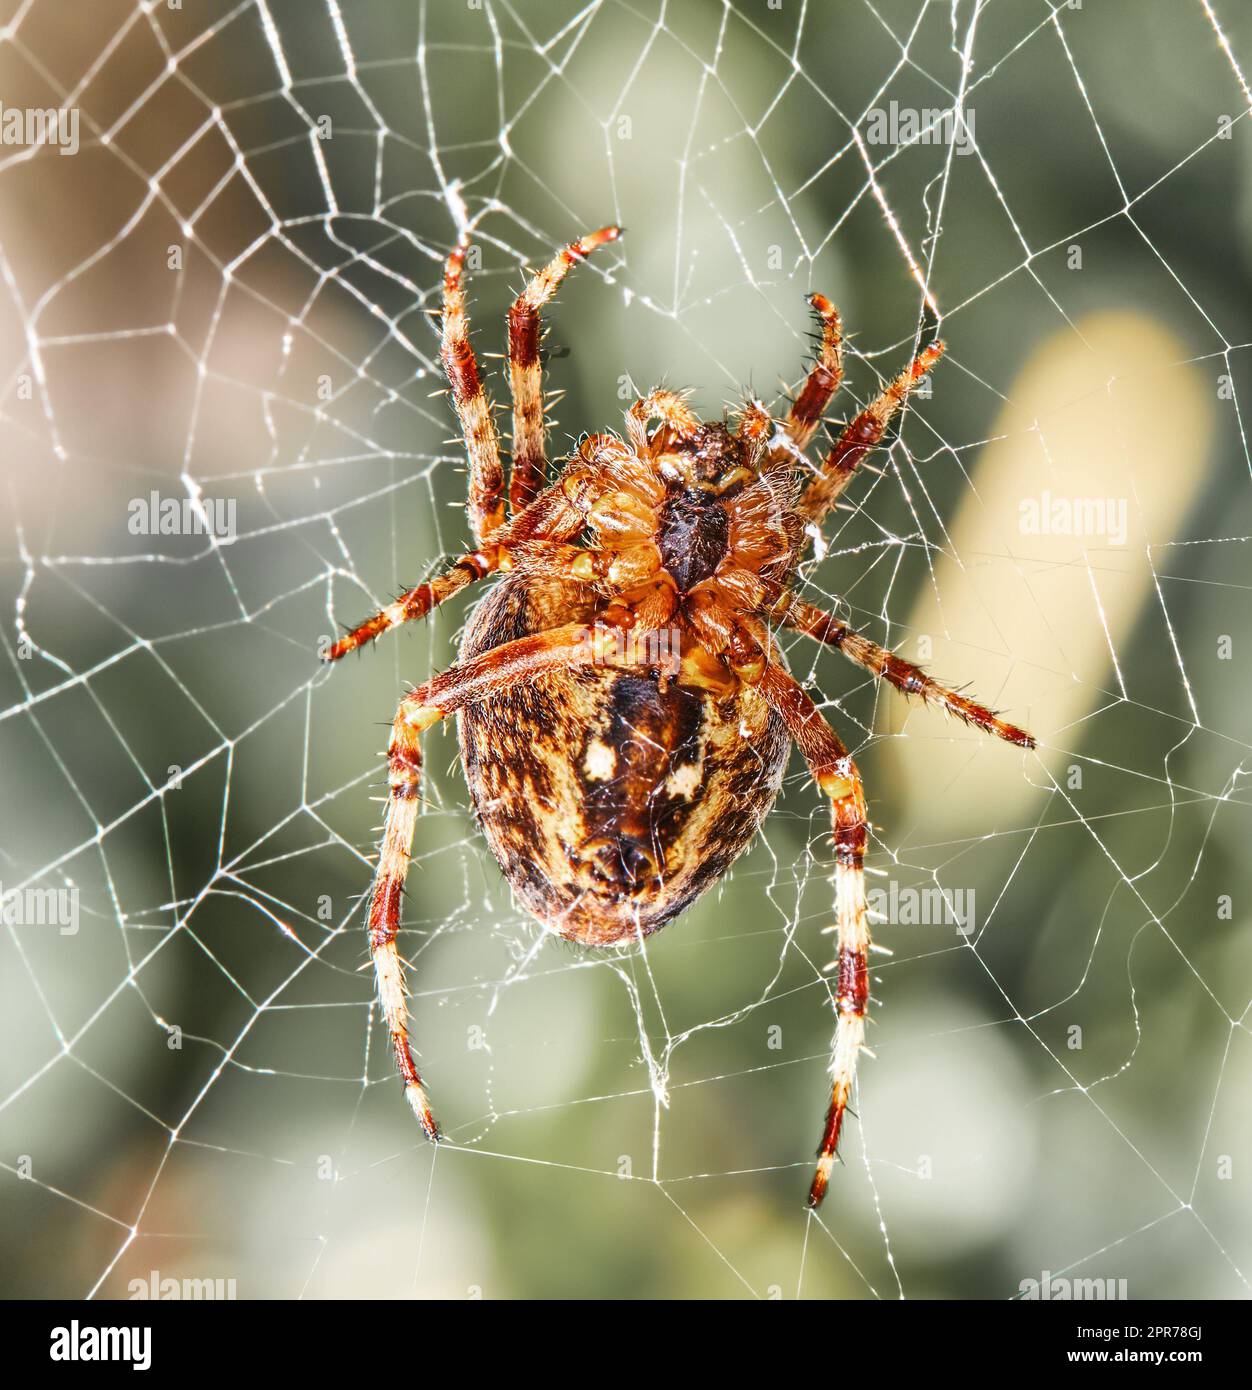 Closeup of a Walnut Orb weaver Spider on a web on a summer day. Specimen of the species Nuctenea umbratica outdoors against a blur leafy background. An eight legged arachnid making a cobweb in nature Stock Photo